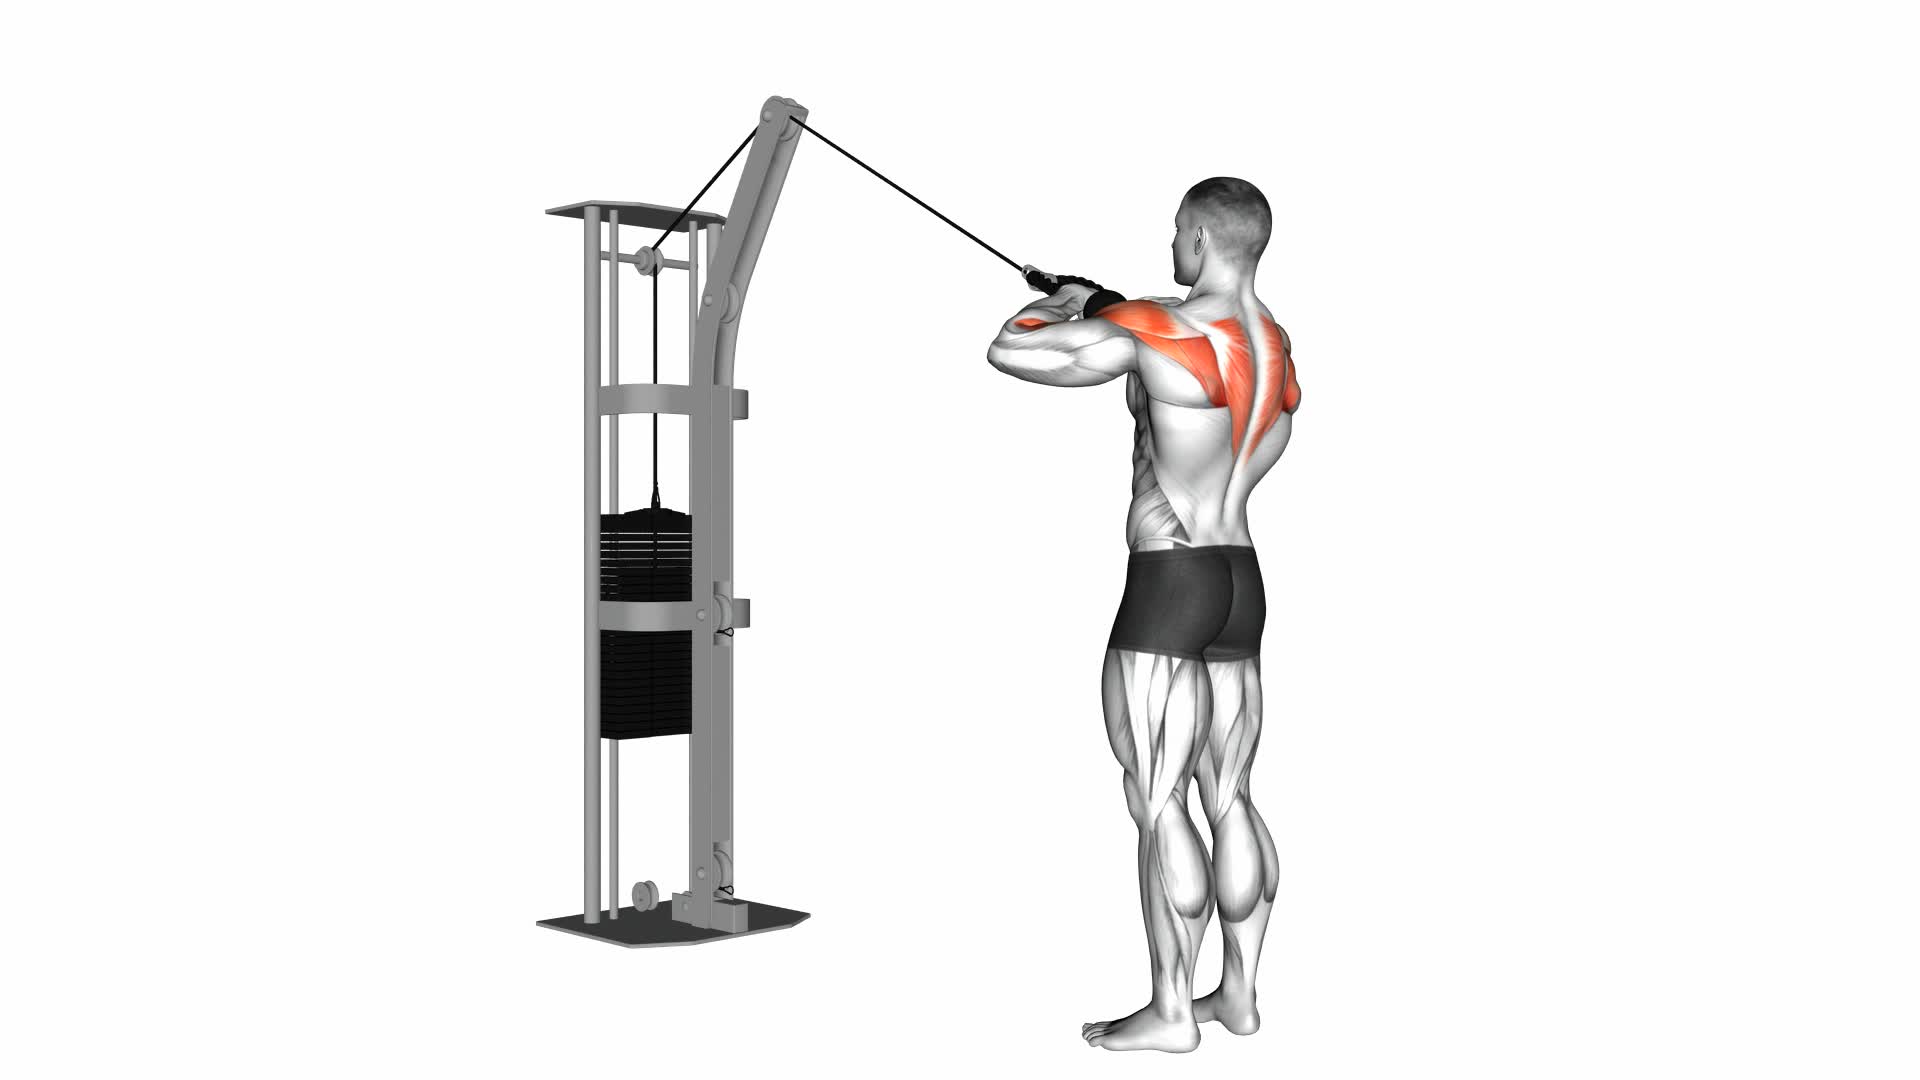 Cable Rear Delt Row (With Rope) - Video Exercise Guide & Tips